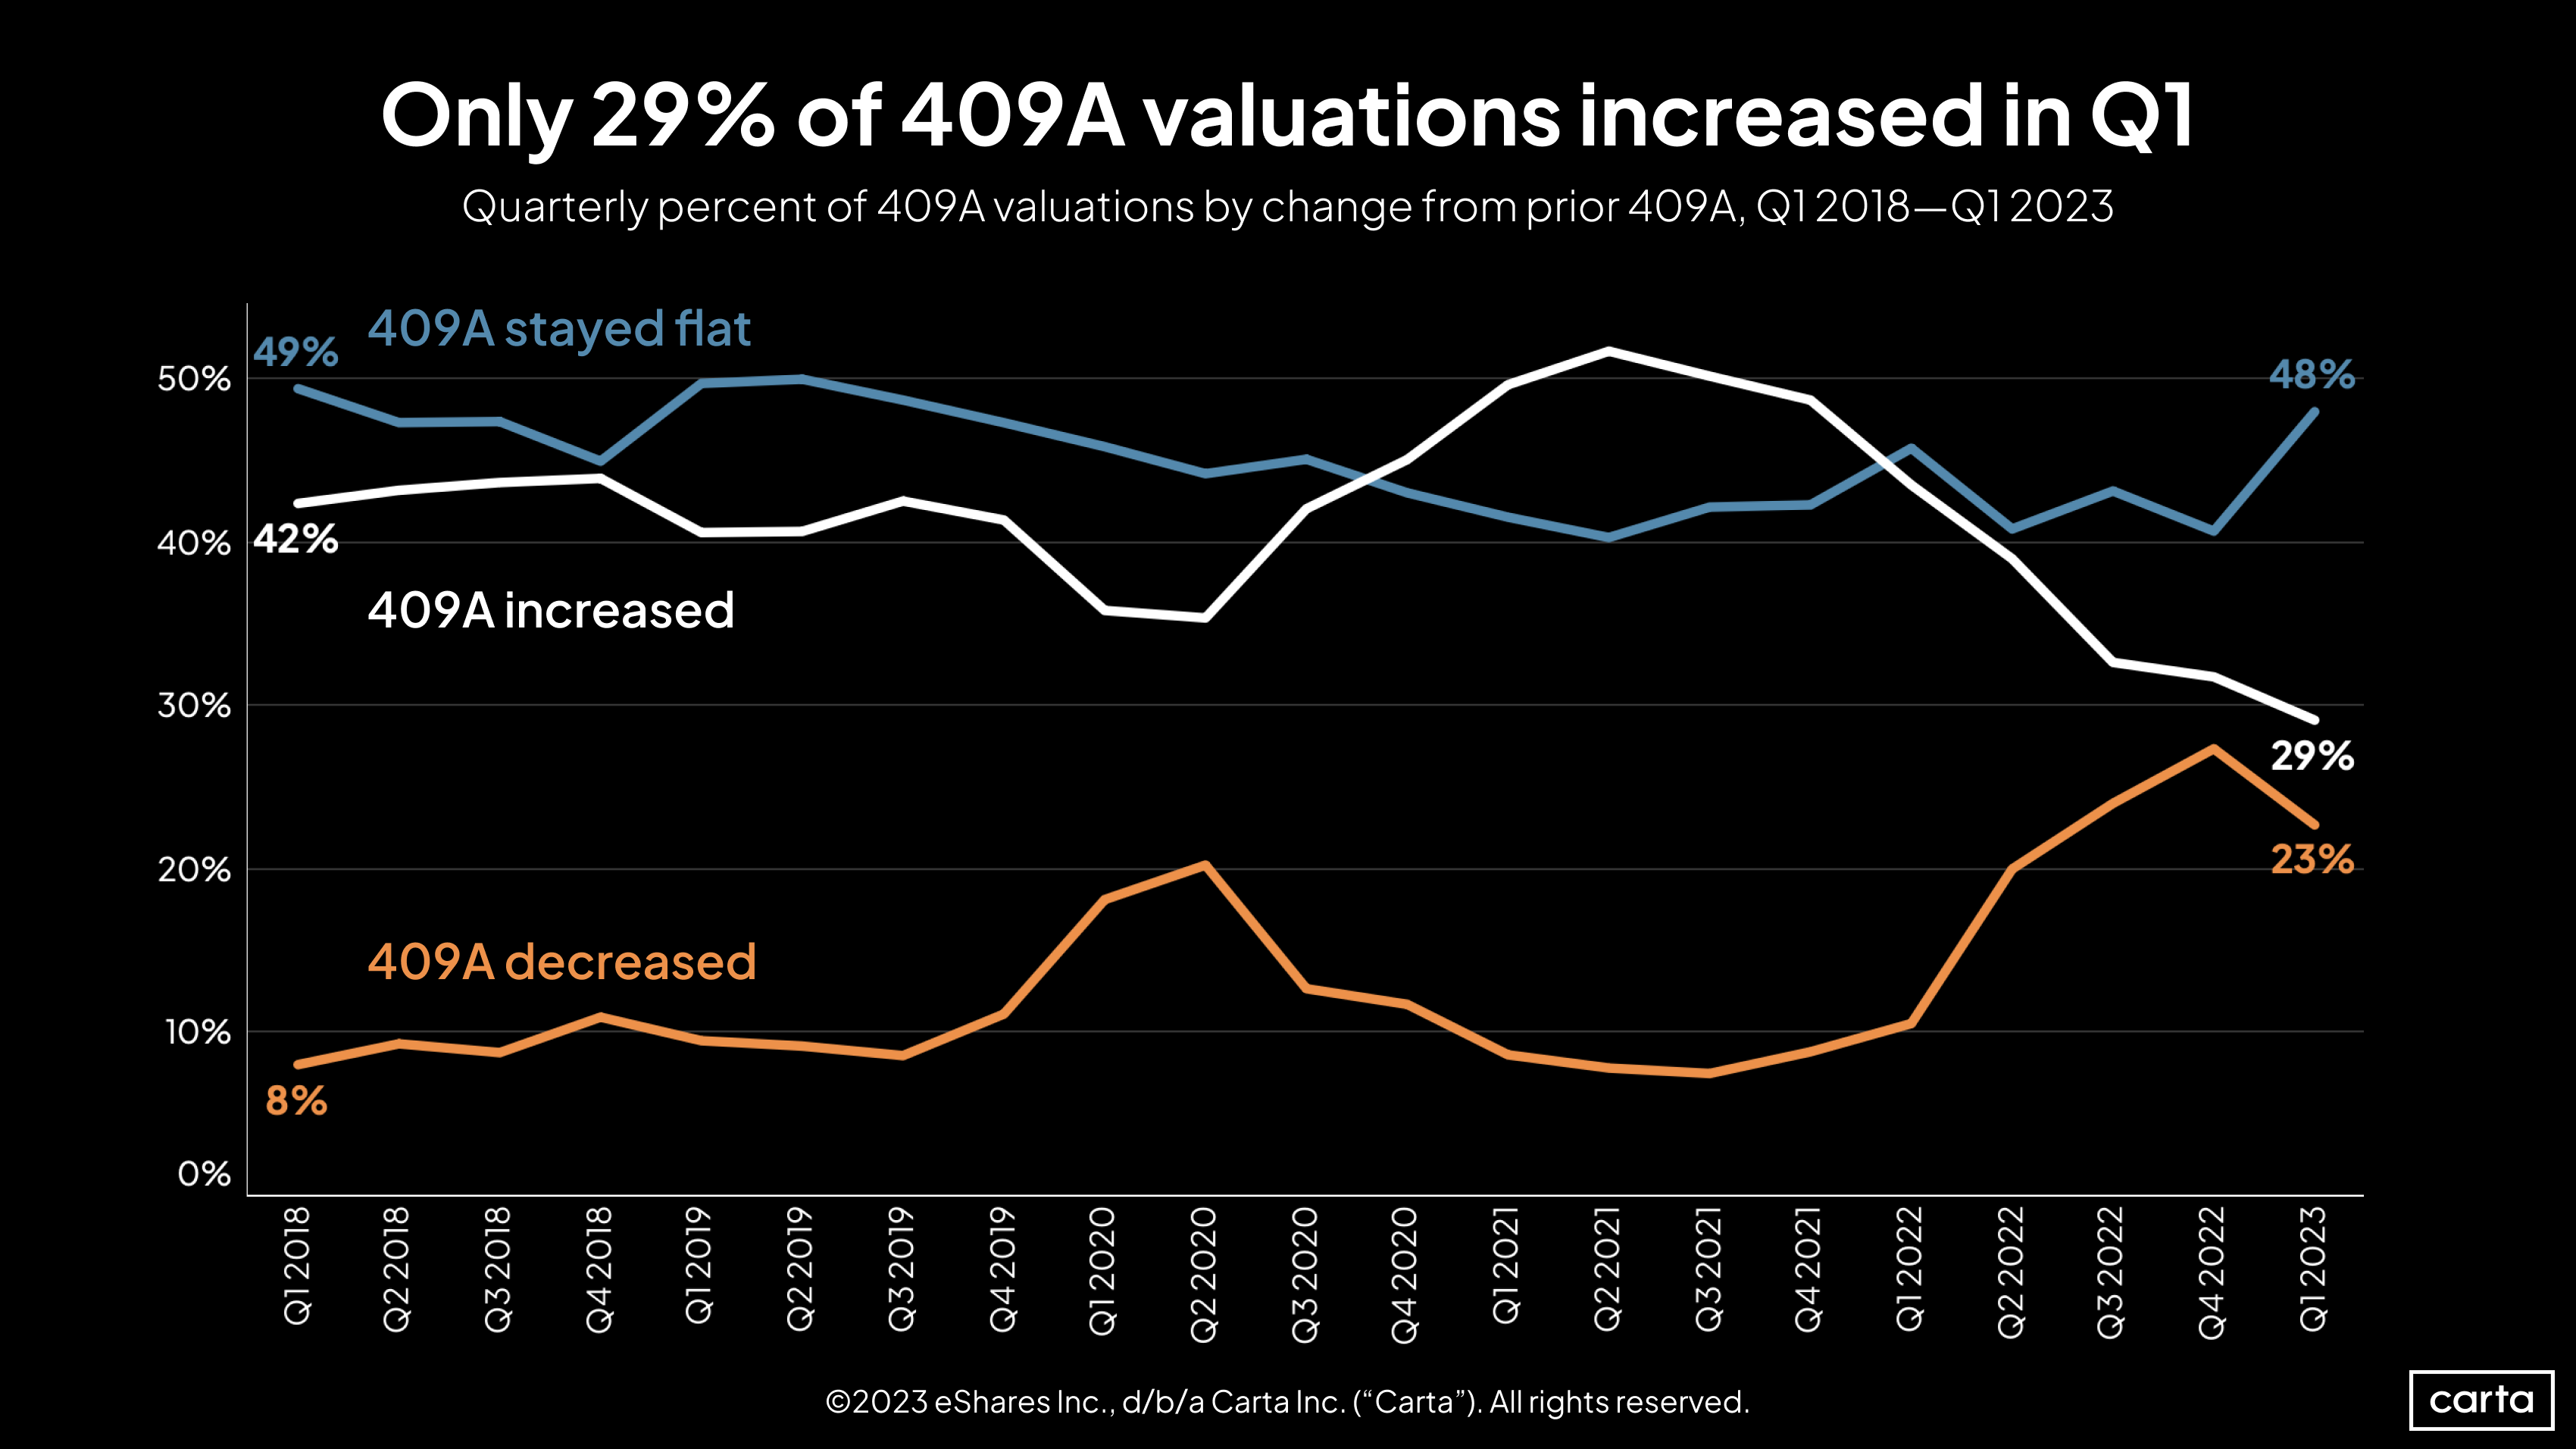 Quarterly percent of 409 A valuations by change from prior 409A, Q1 2018-Q1 2023